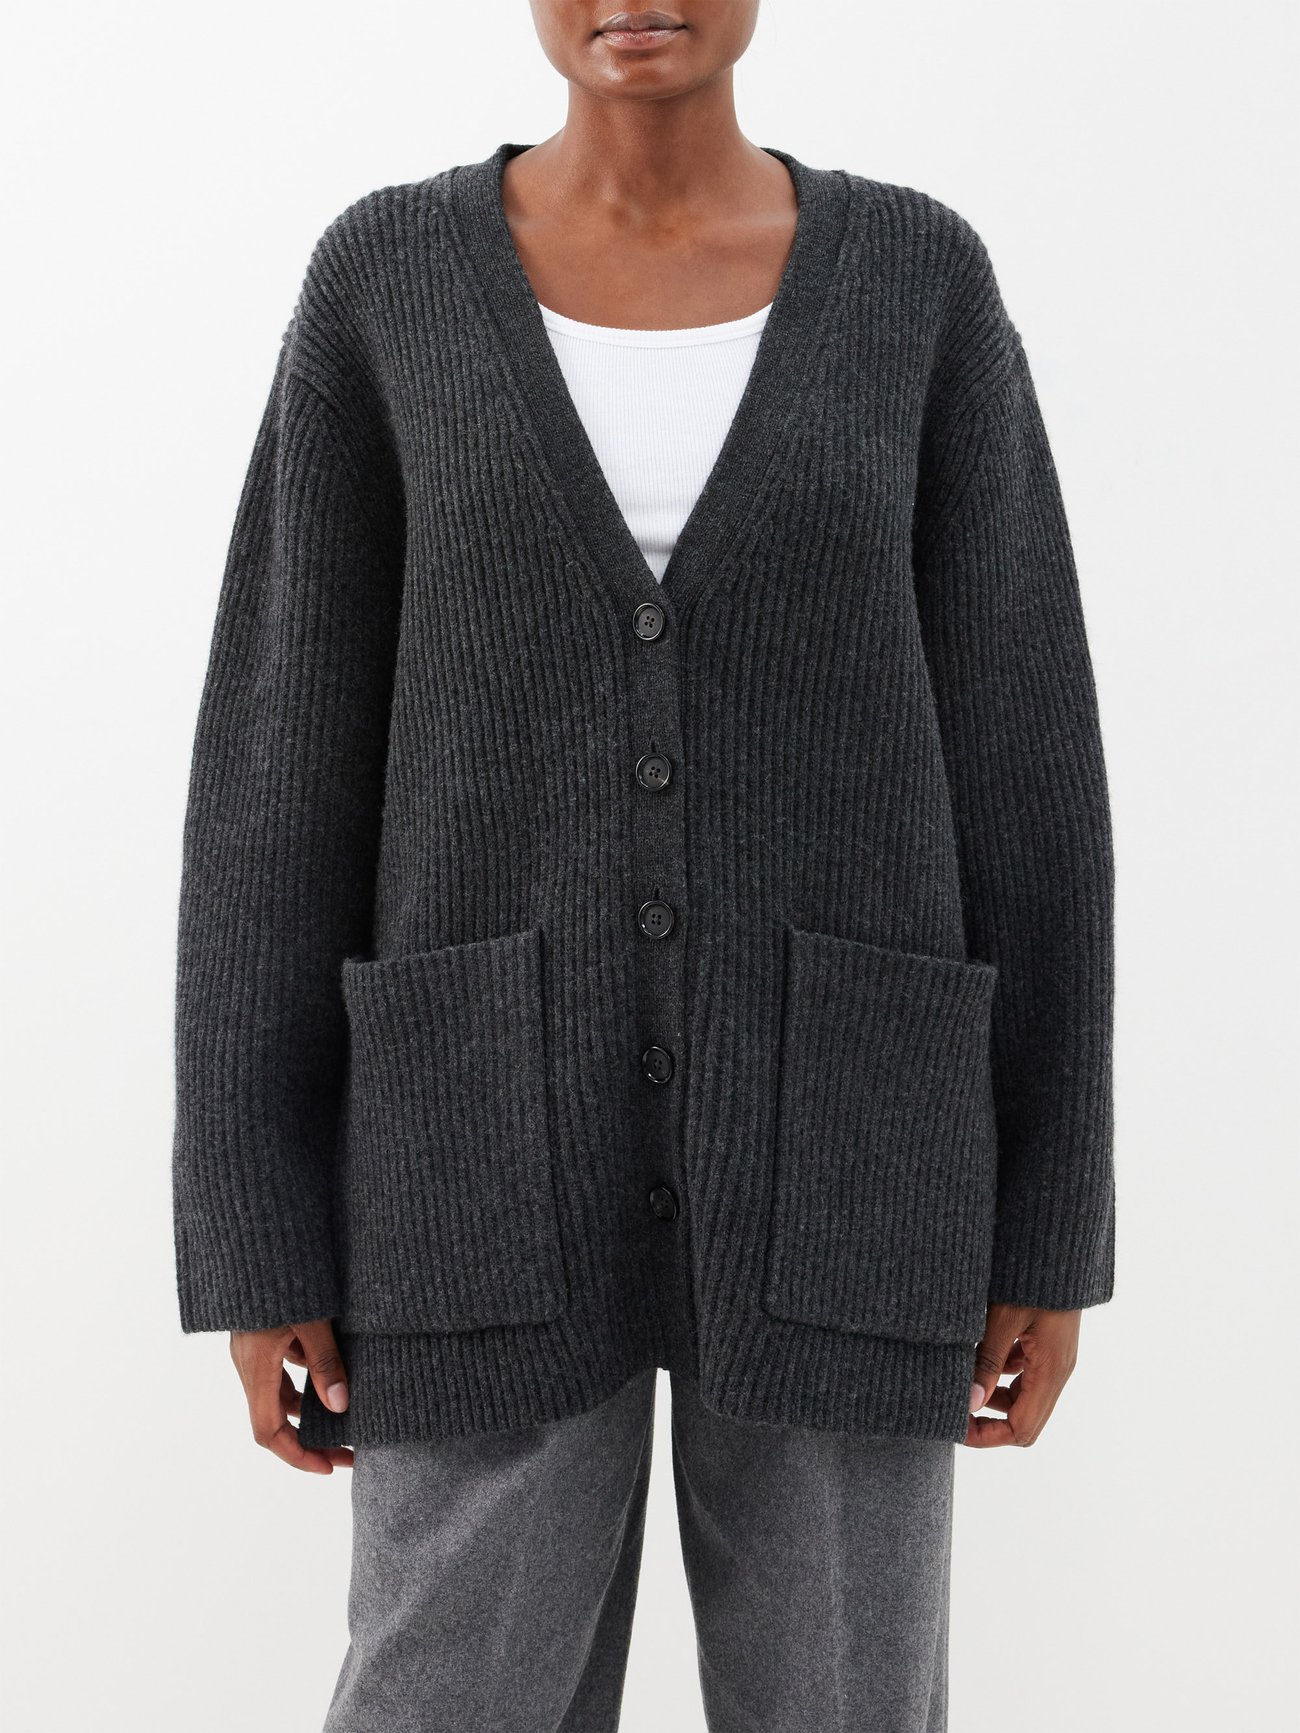 Khaite's Cardigan Is Fashion's Favourite Knit For 2023 | Who What Wear